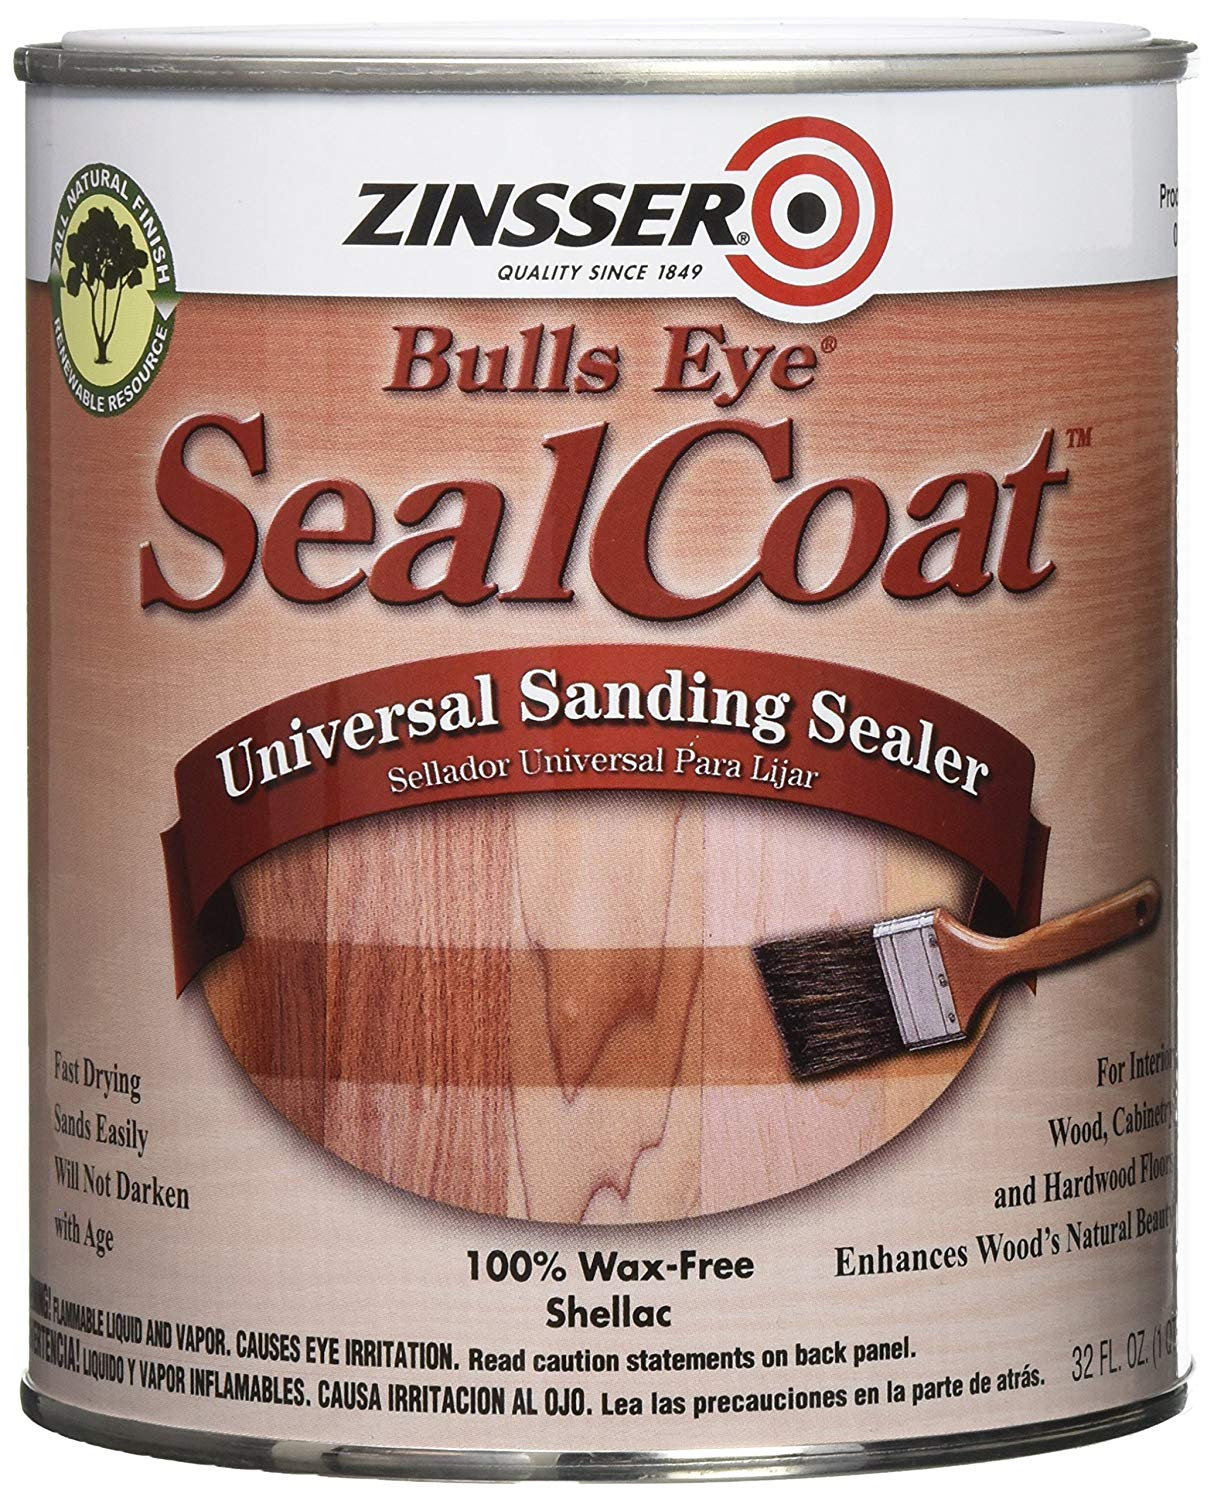 20 Unique How Much Does It Cost to Refinish Hardwood Floors 2024 free download how much does it cost to refinish hardwood floors of rust oleum zinsser 854 1 quart bulls eye sealcoat universal sanding with regard to rust oleum zinsser 854 1 quart bulls eye sealcoat univ